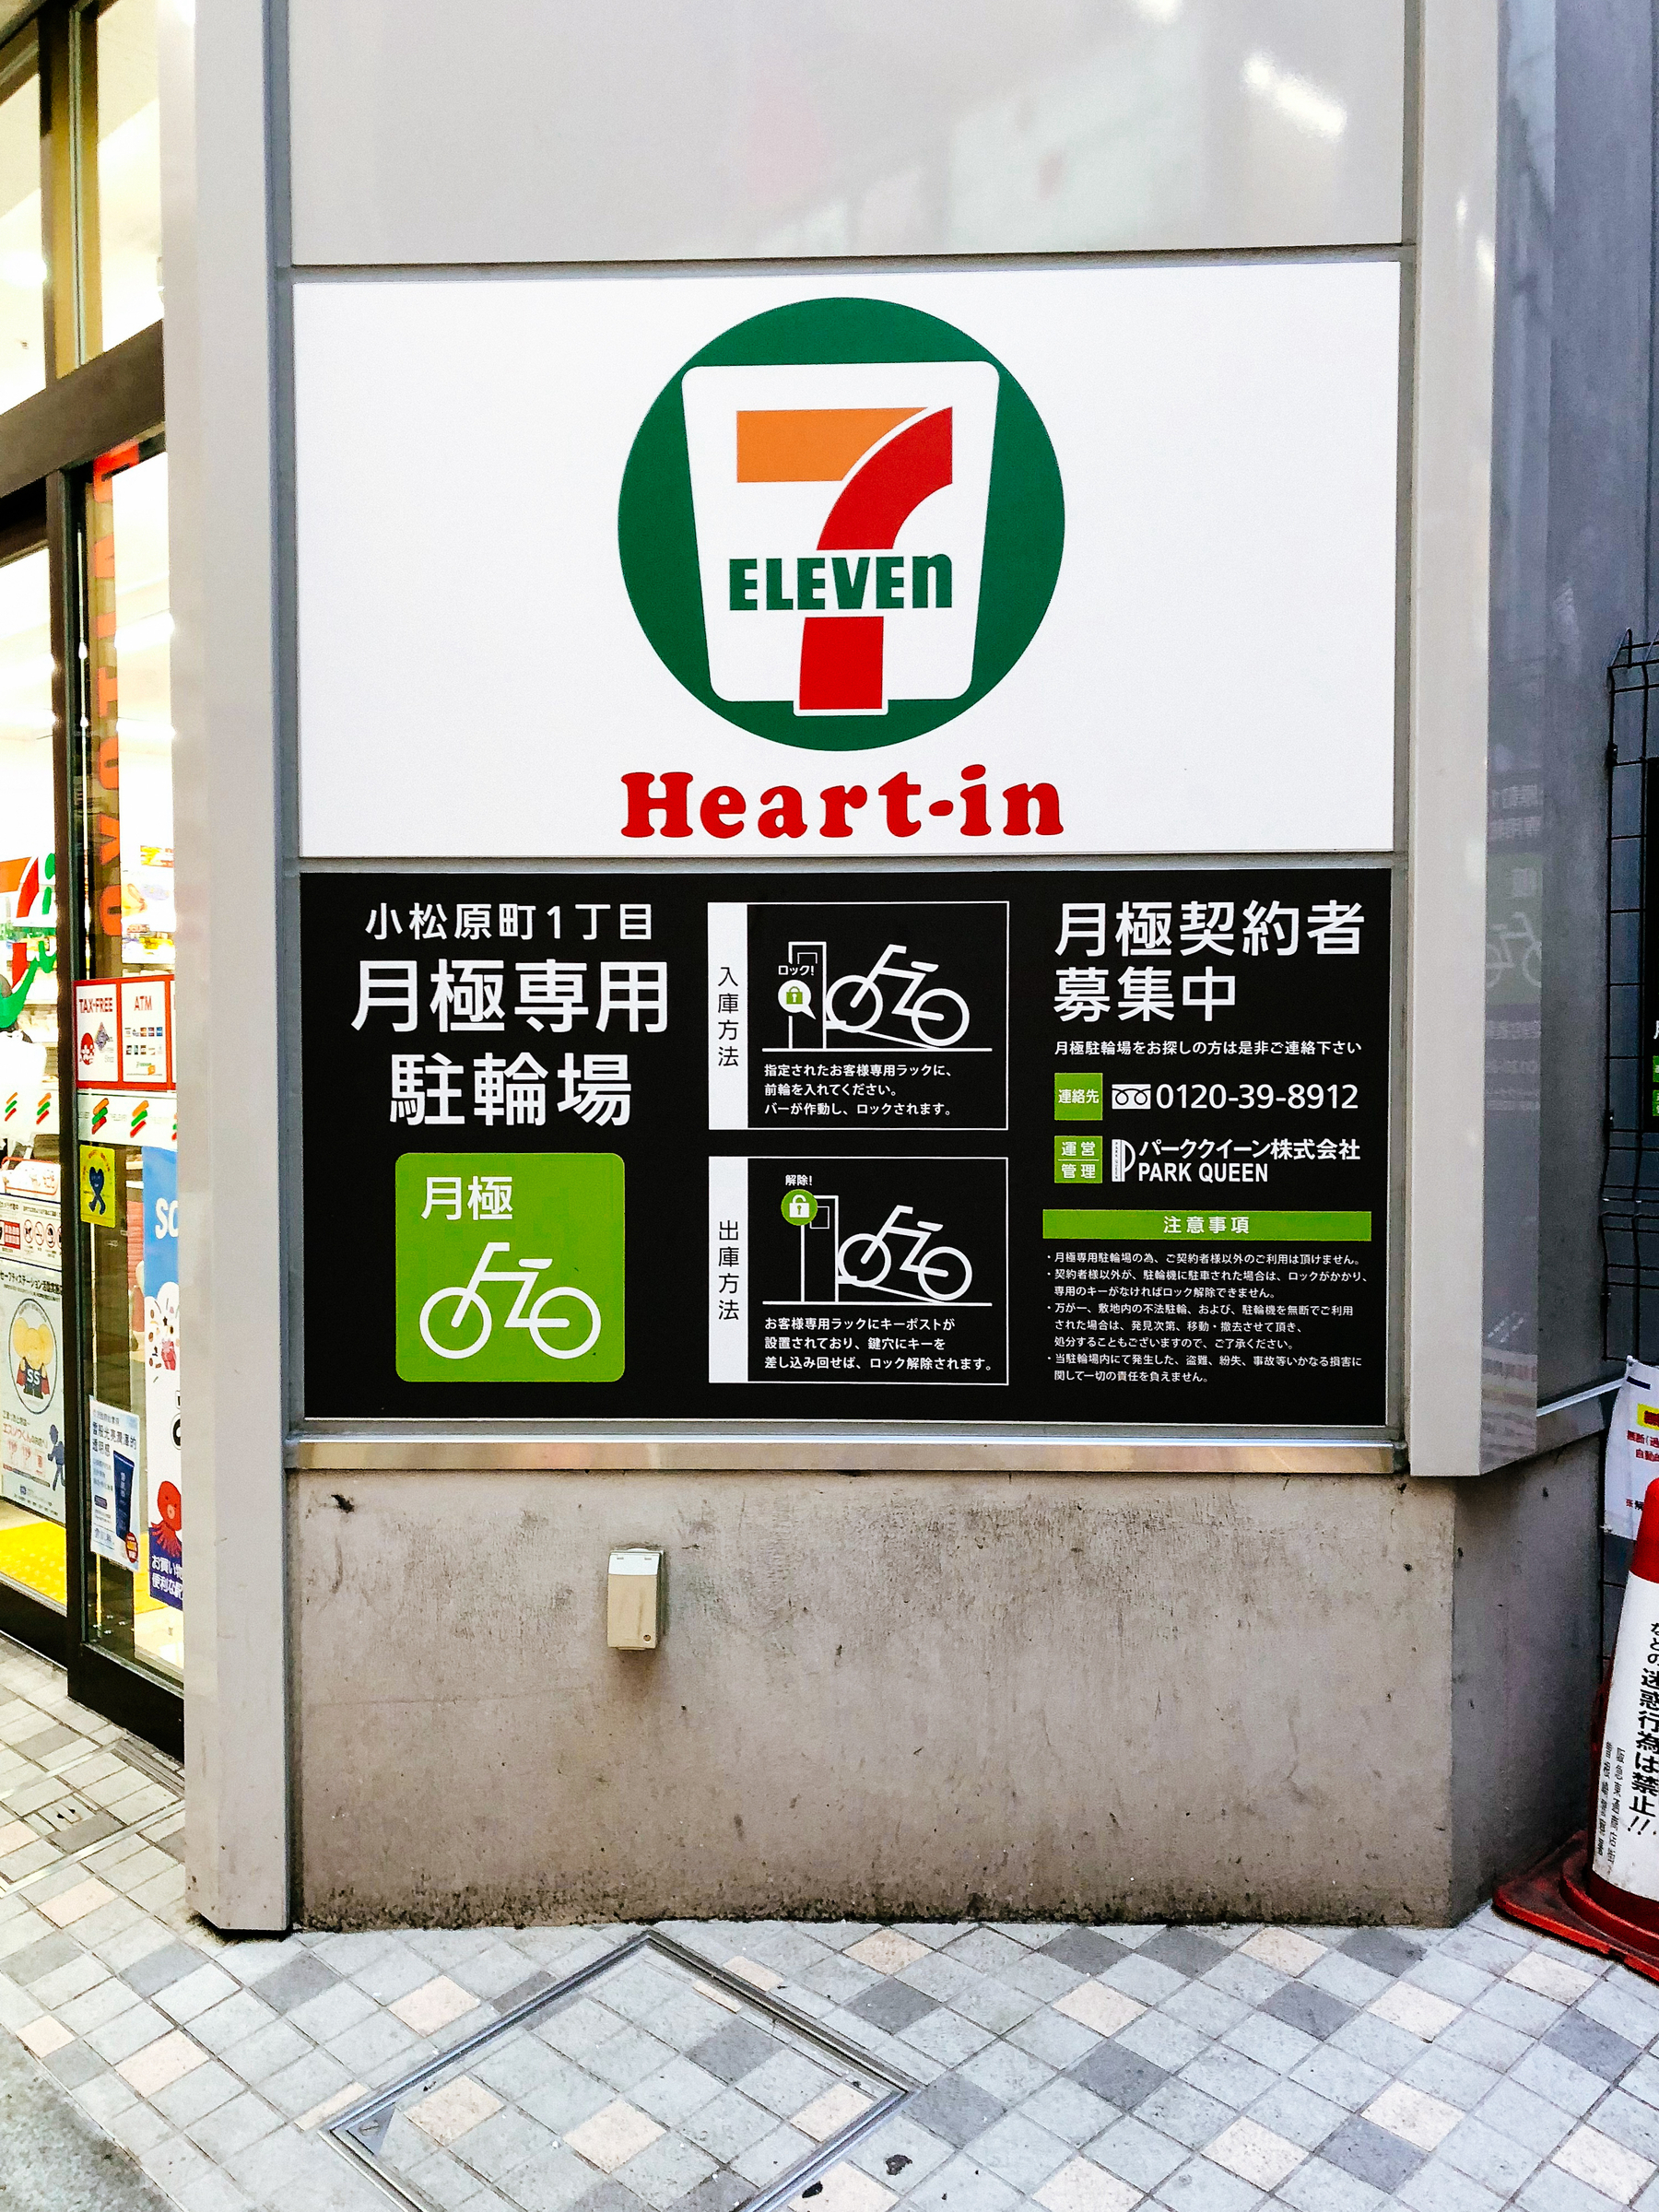 A 7-Eleven in Japan. 